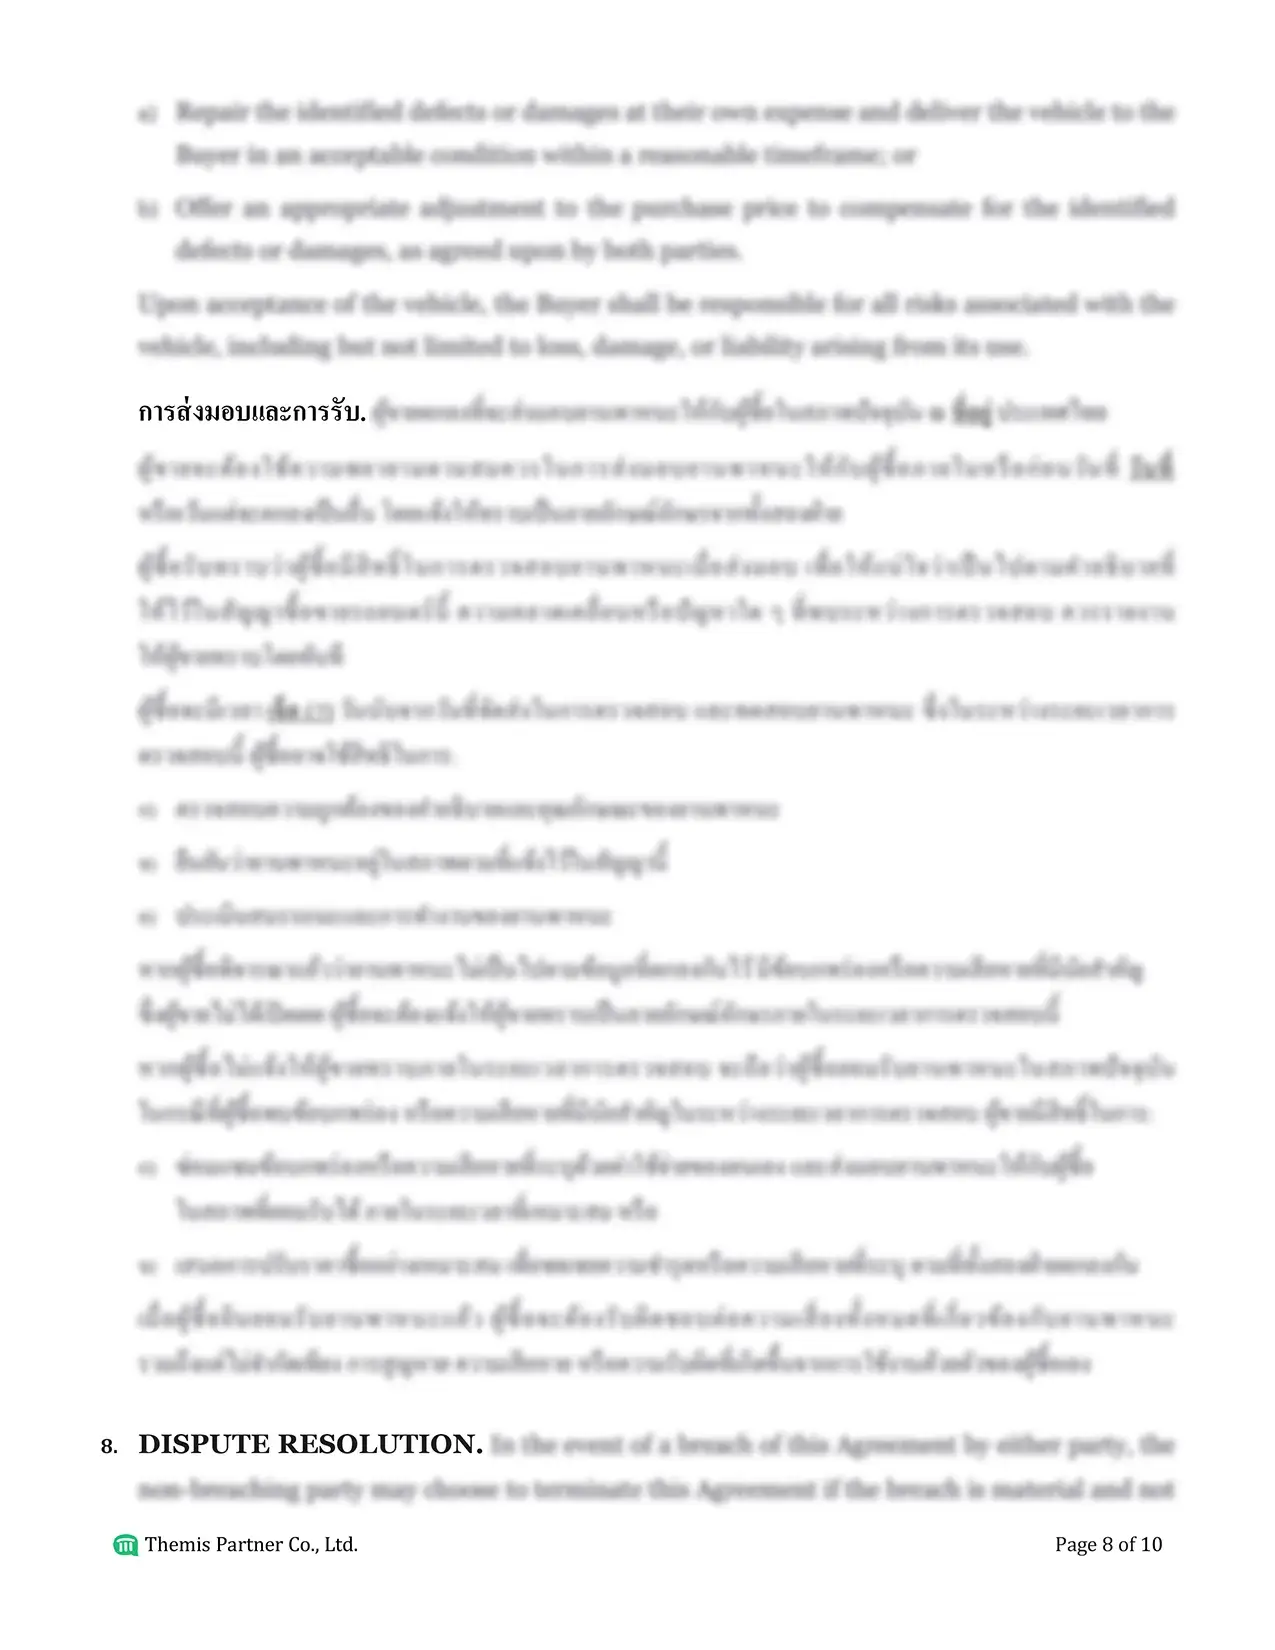 Car purchase contract Thailand 8